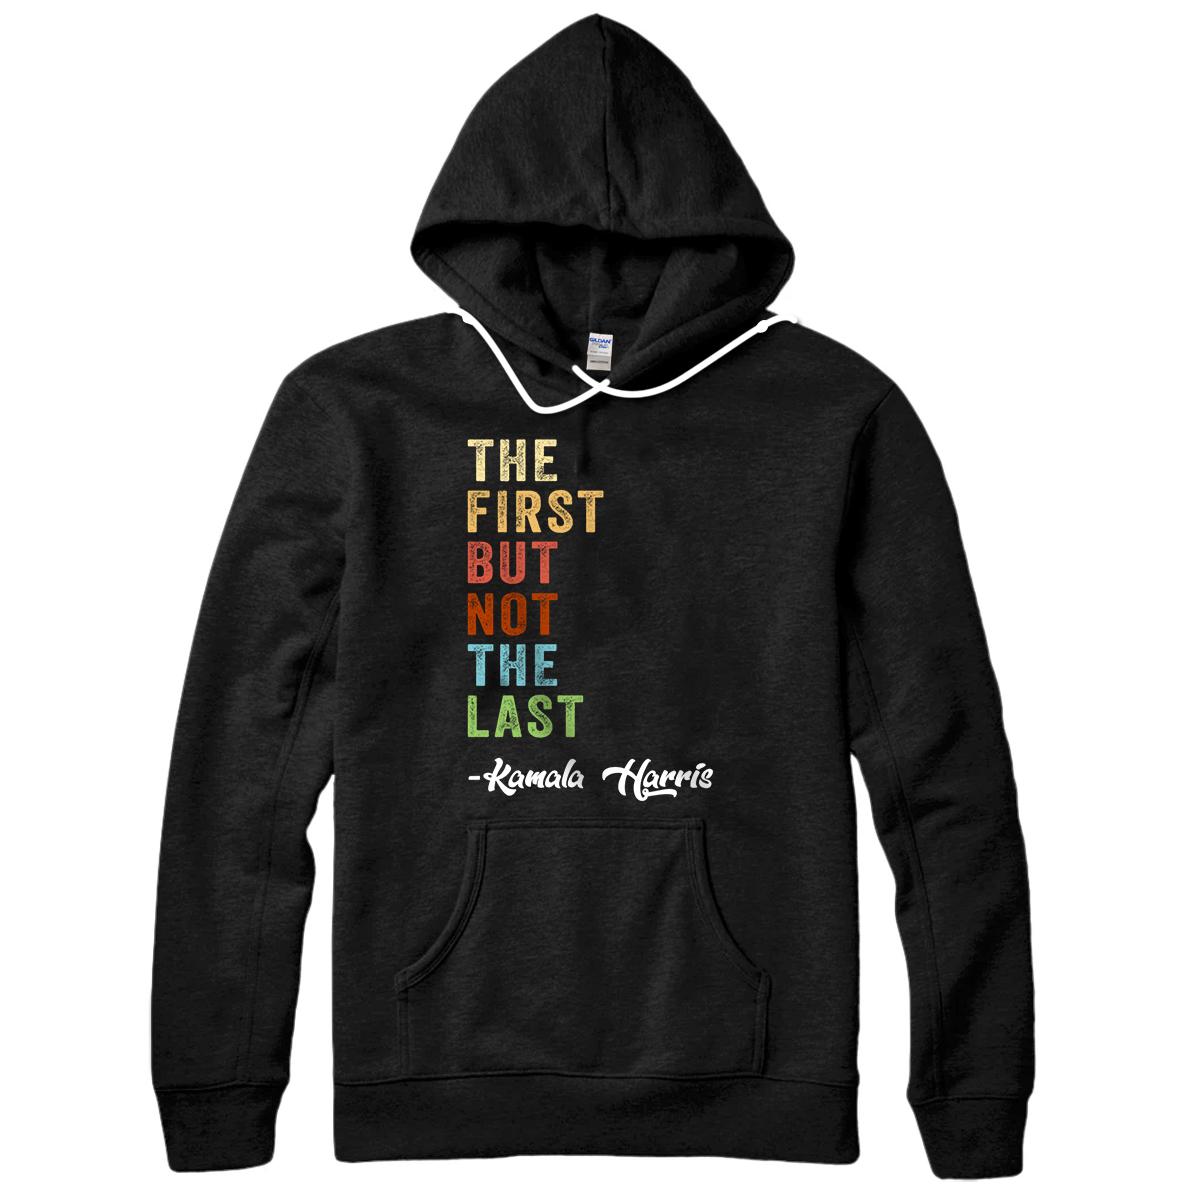 Personalized The First But Not The Last Shirt - Madam Vice President 2020 Pullover Hoodie